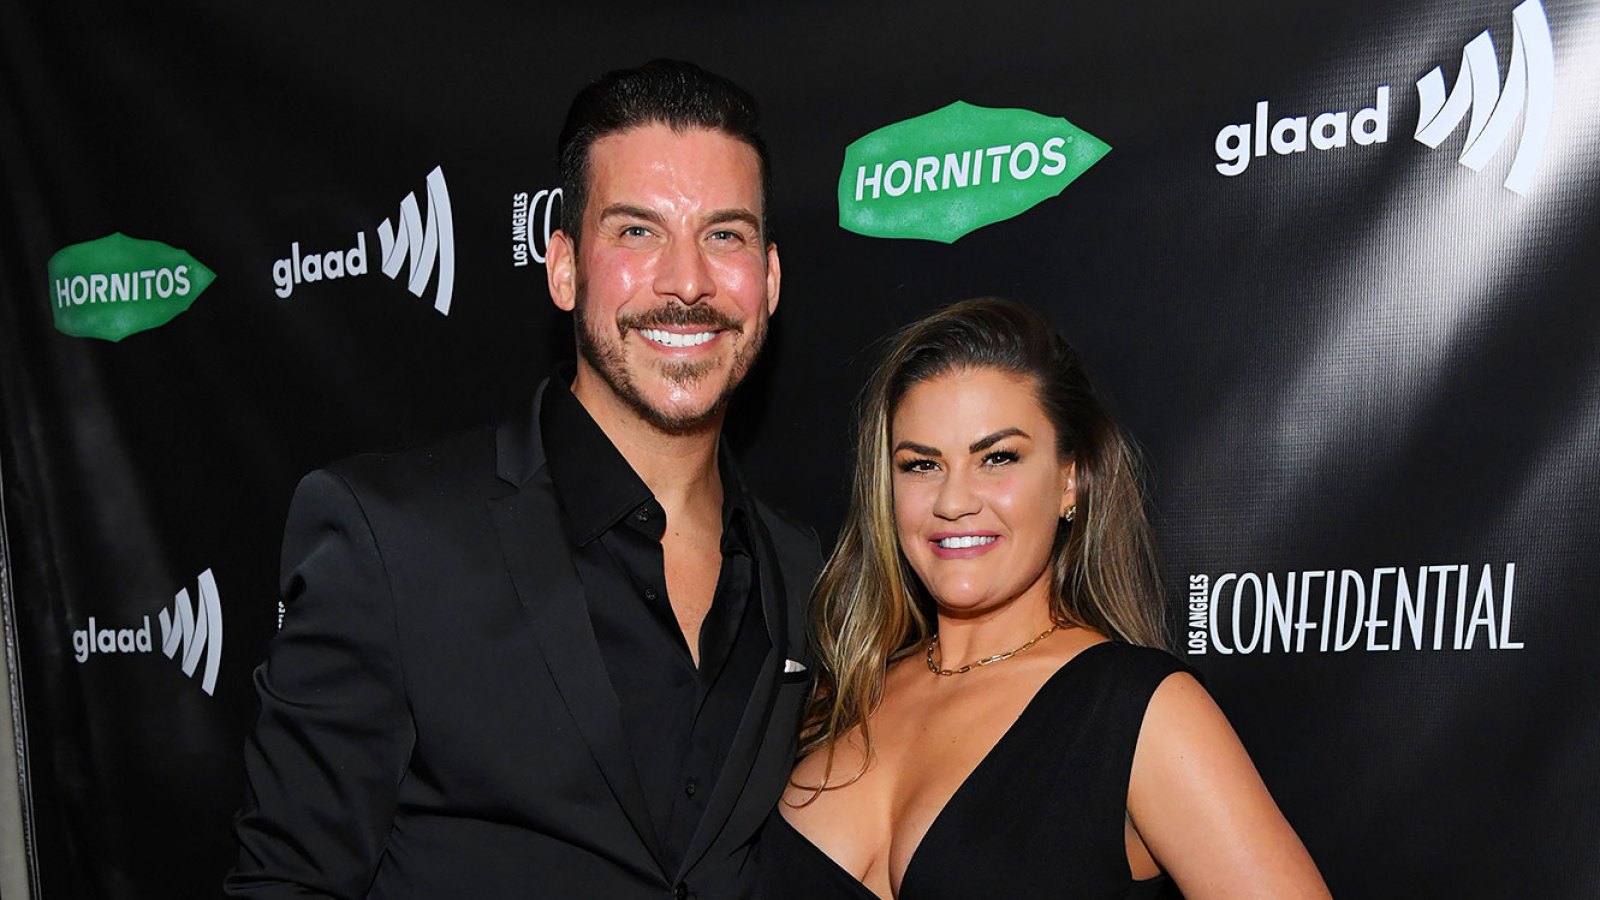 Brittany Cartwright Did Not Have a Stroke Despite Jax Taylor Claim